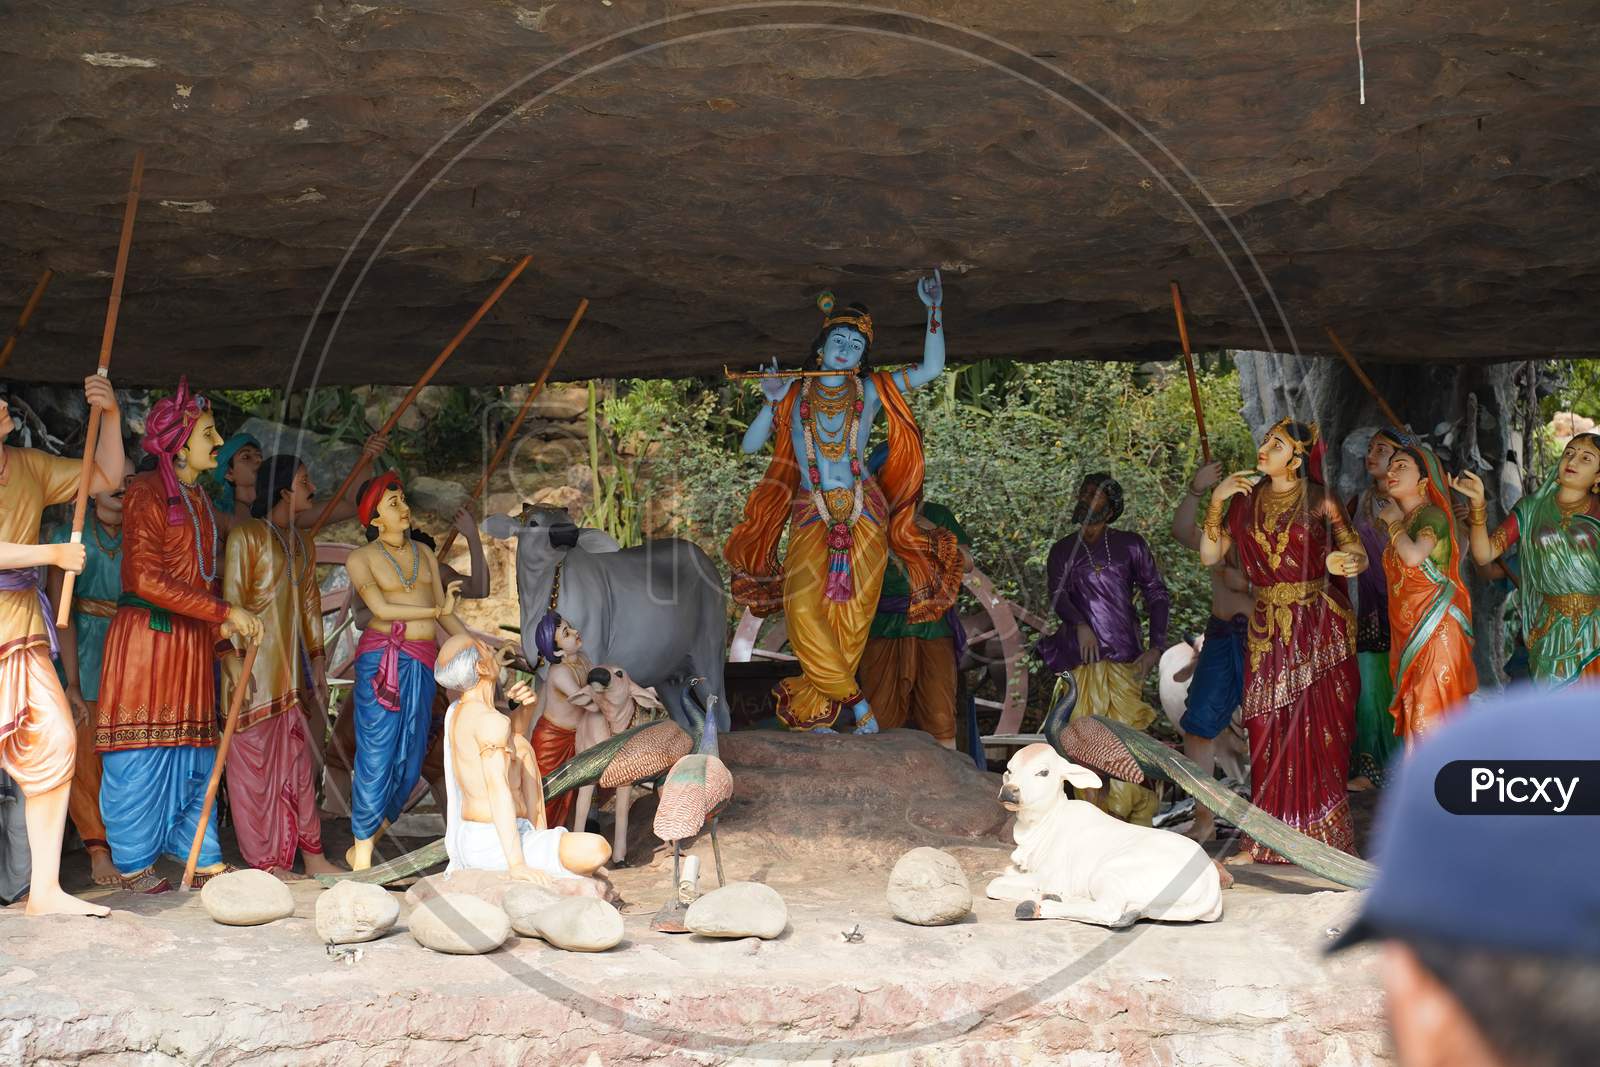 Image of a statue of lord Krishna and radha